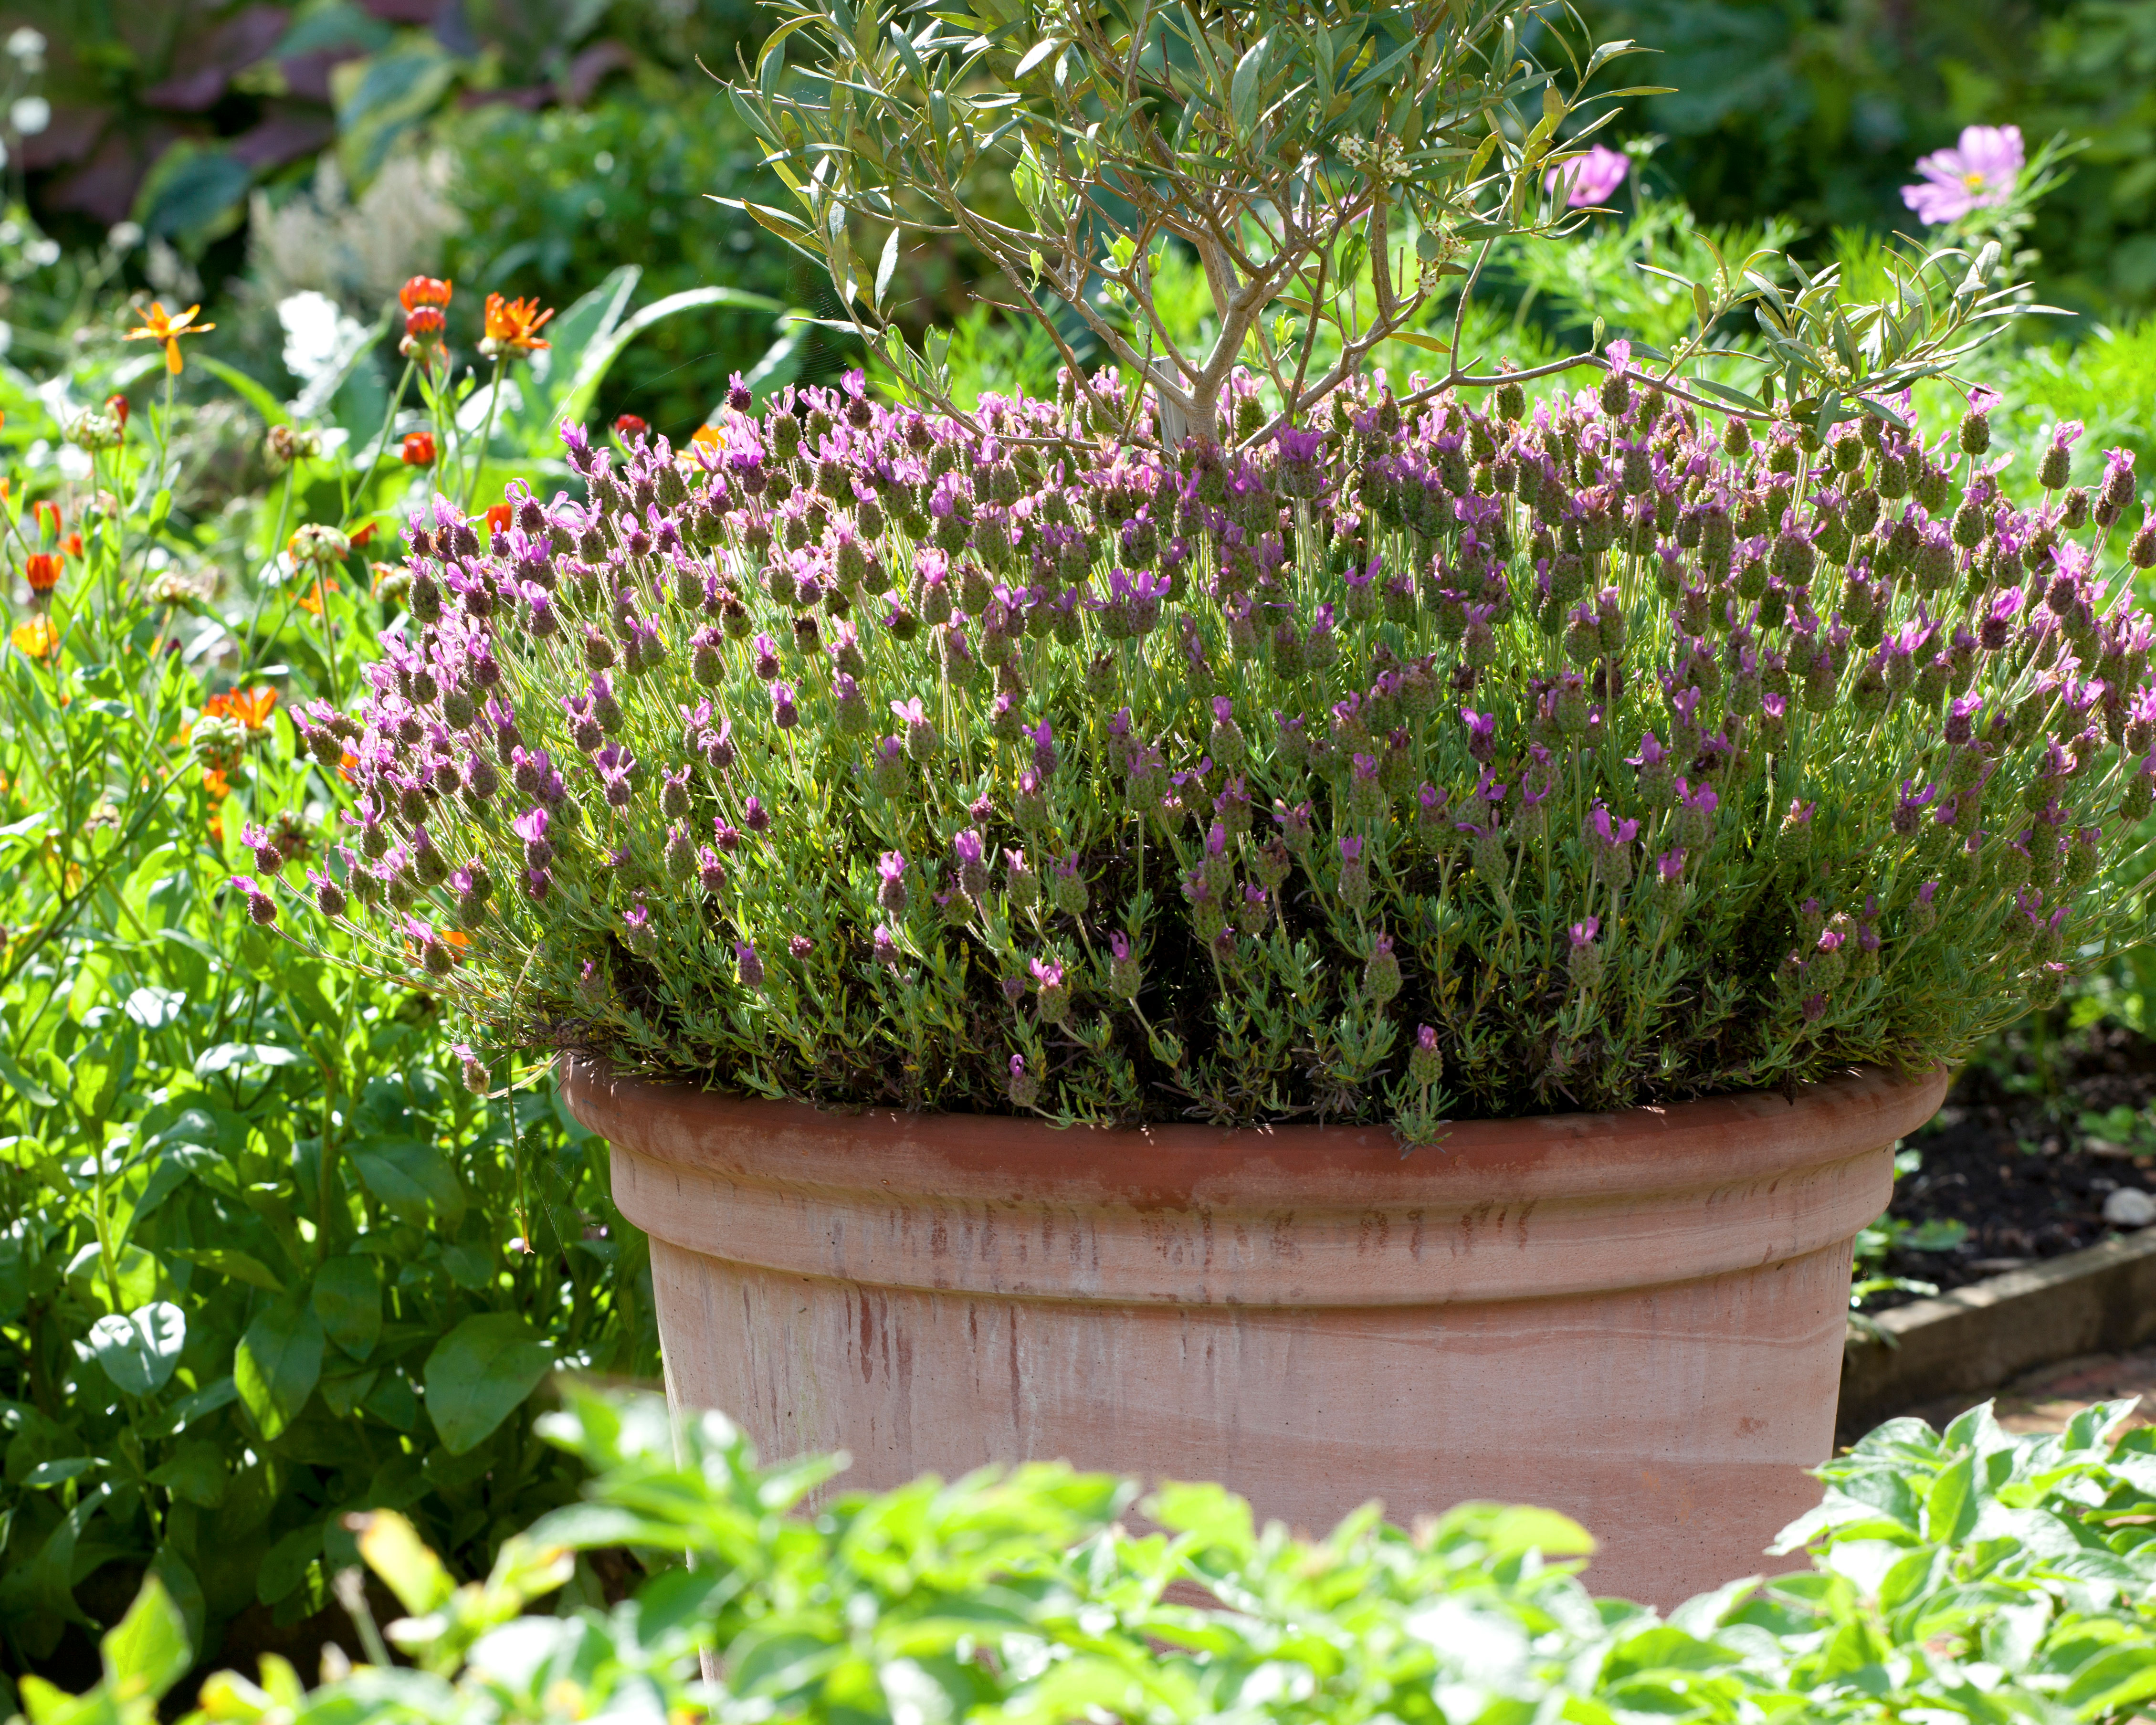 lavender planted in a terracotta pot in a garden